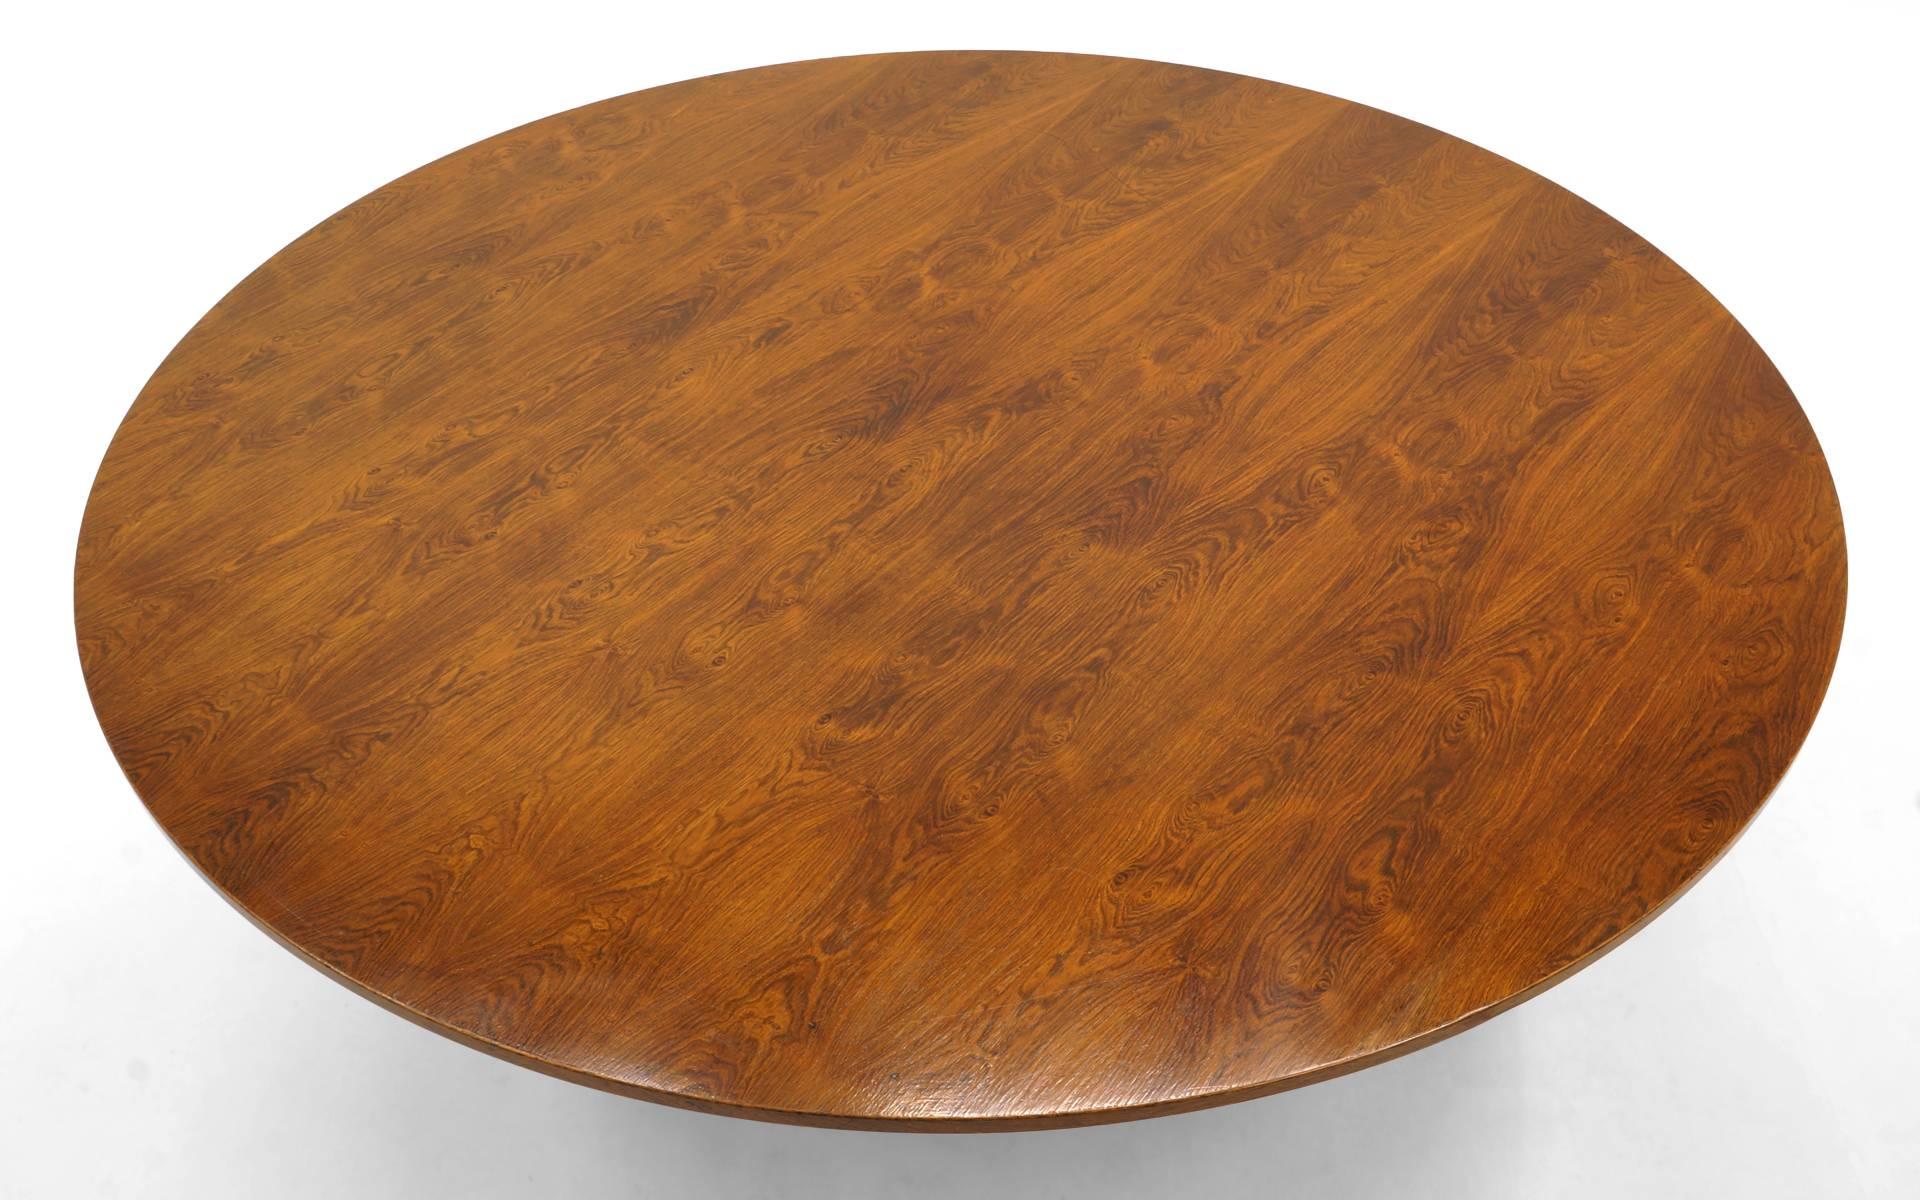 This unique prototype table was designed by George Nelson and features a 1.5 inch thick Brazilian rosewood top made from lumber Nelson selected on a trip to Brasilia and meeting with Oscar Niemeyer. It never went into production due to the high cost